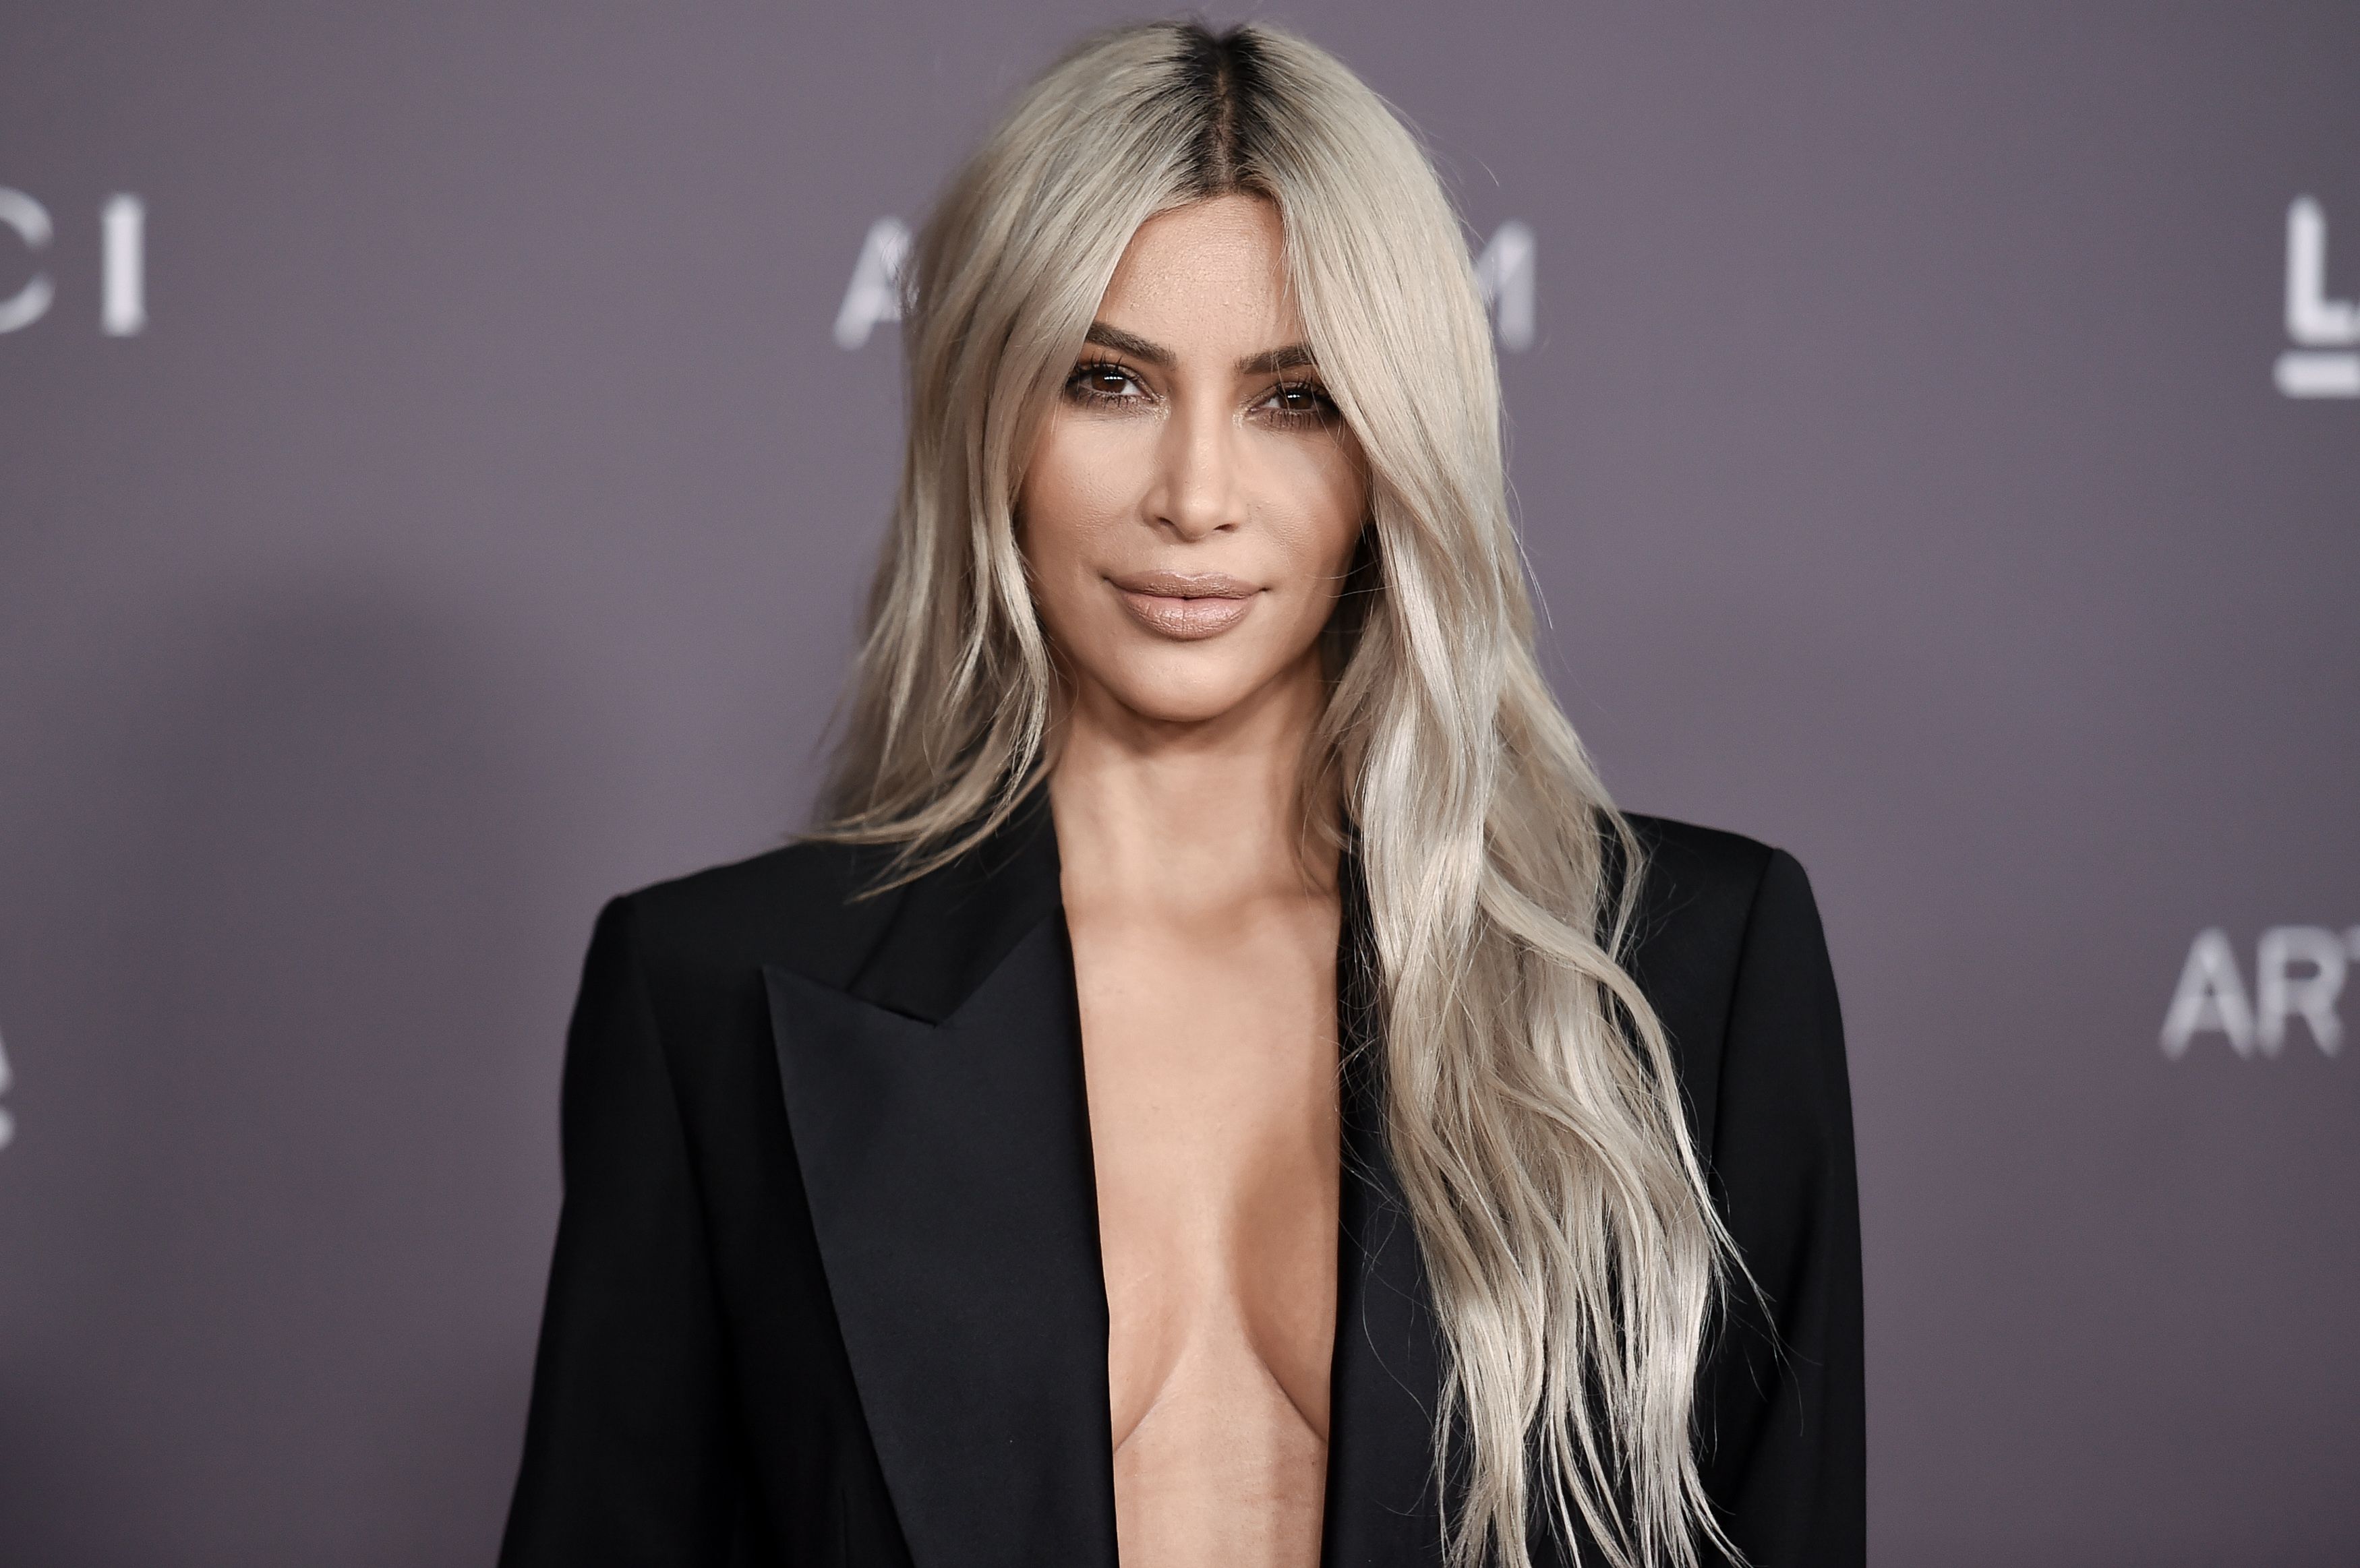 Kim Kardashian Is Unrecognizable in Photo Without Makeup, Filter